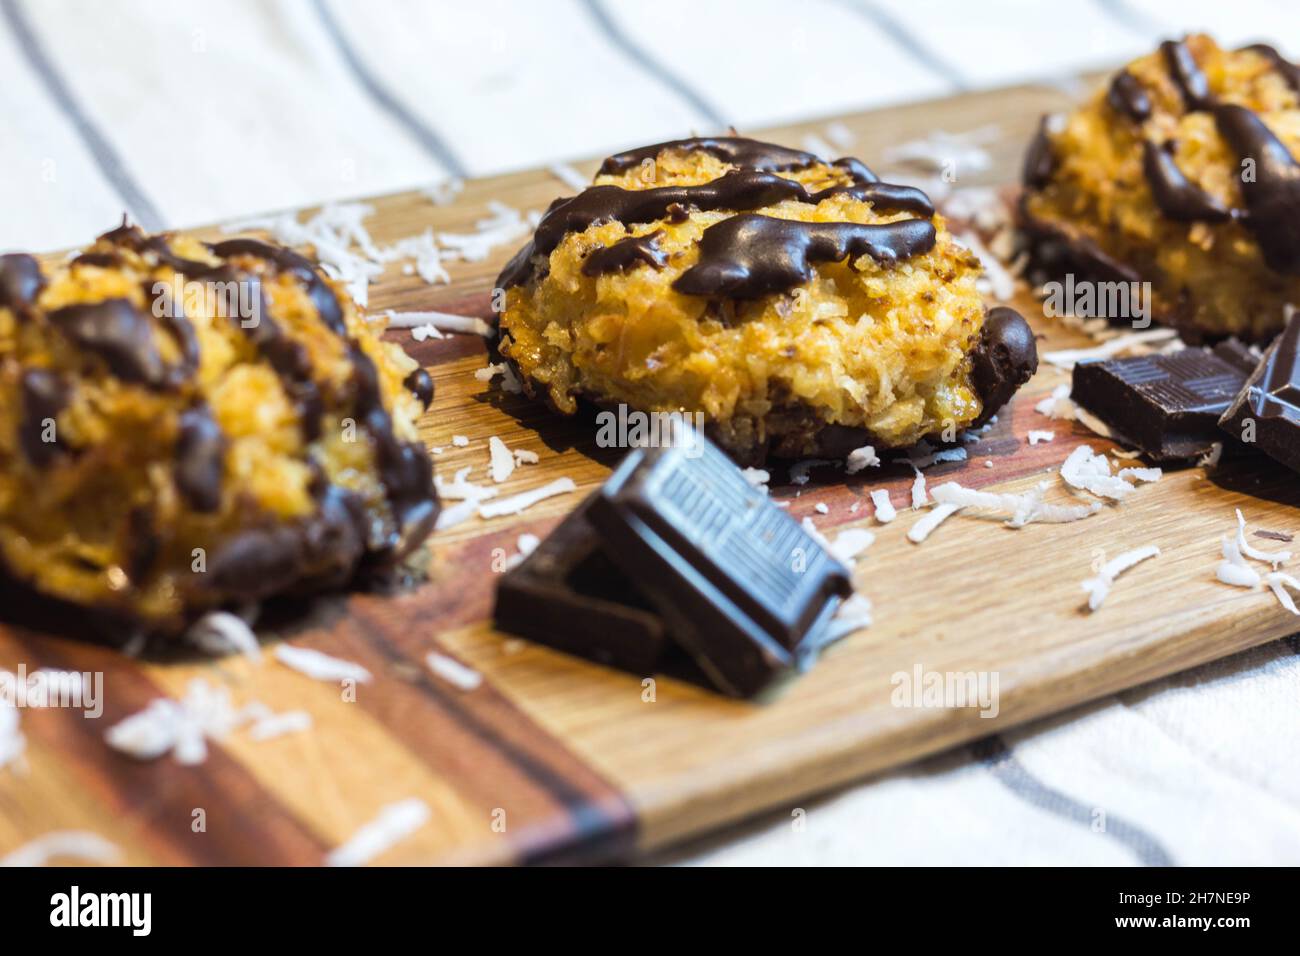 Close up of Coconut Macaroons with Dark Chocolate Drizzle Served on Wooden Serving Board Garnished with Chocolate Pieces and Coconut Shavings. Selecti Stock Photo